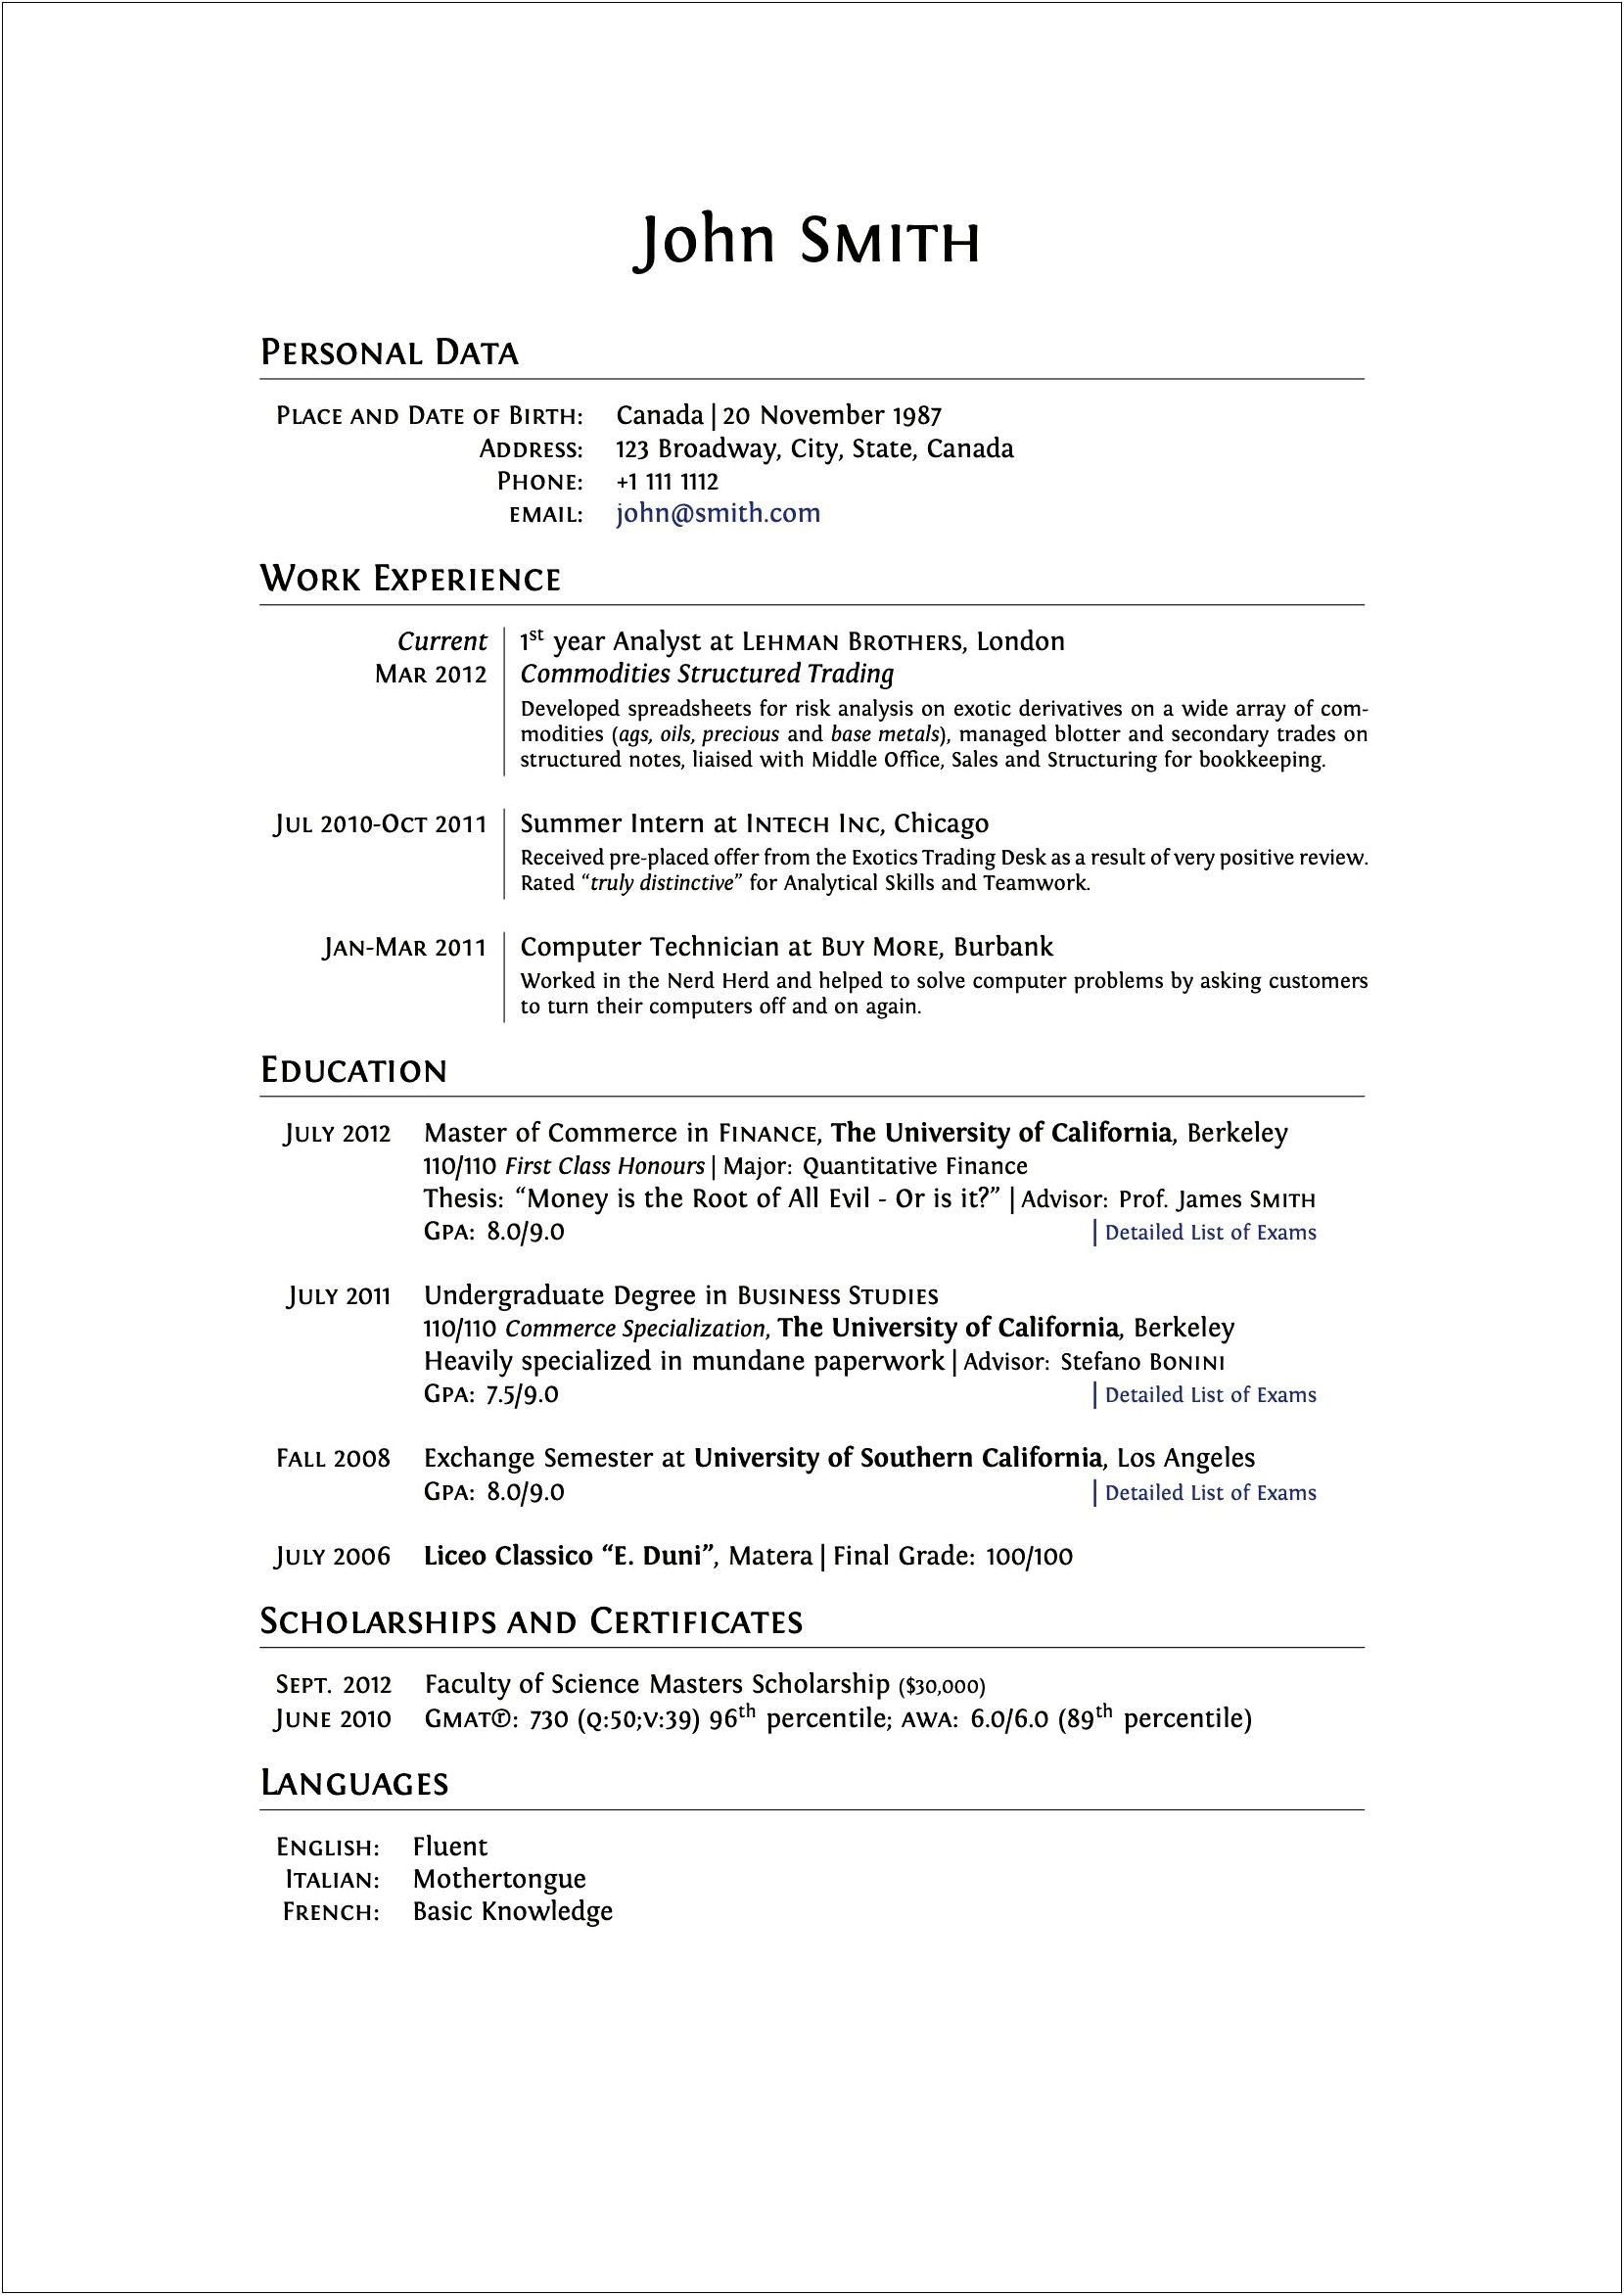 Resume Samples For Students Applying To Graduate School